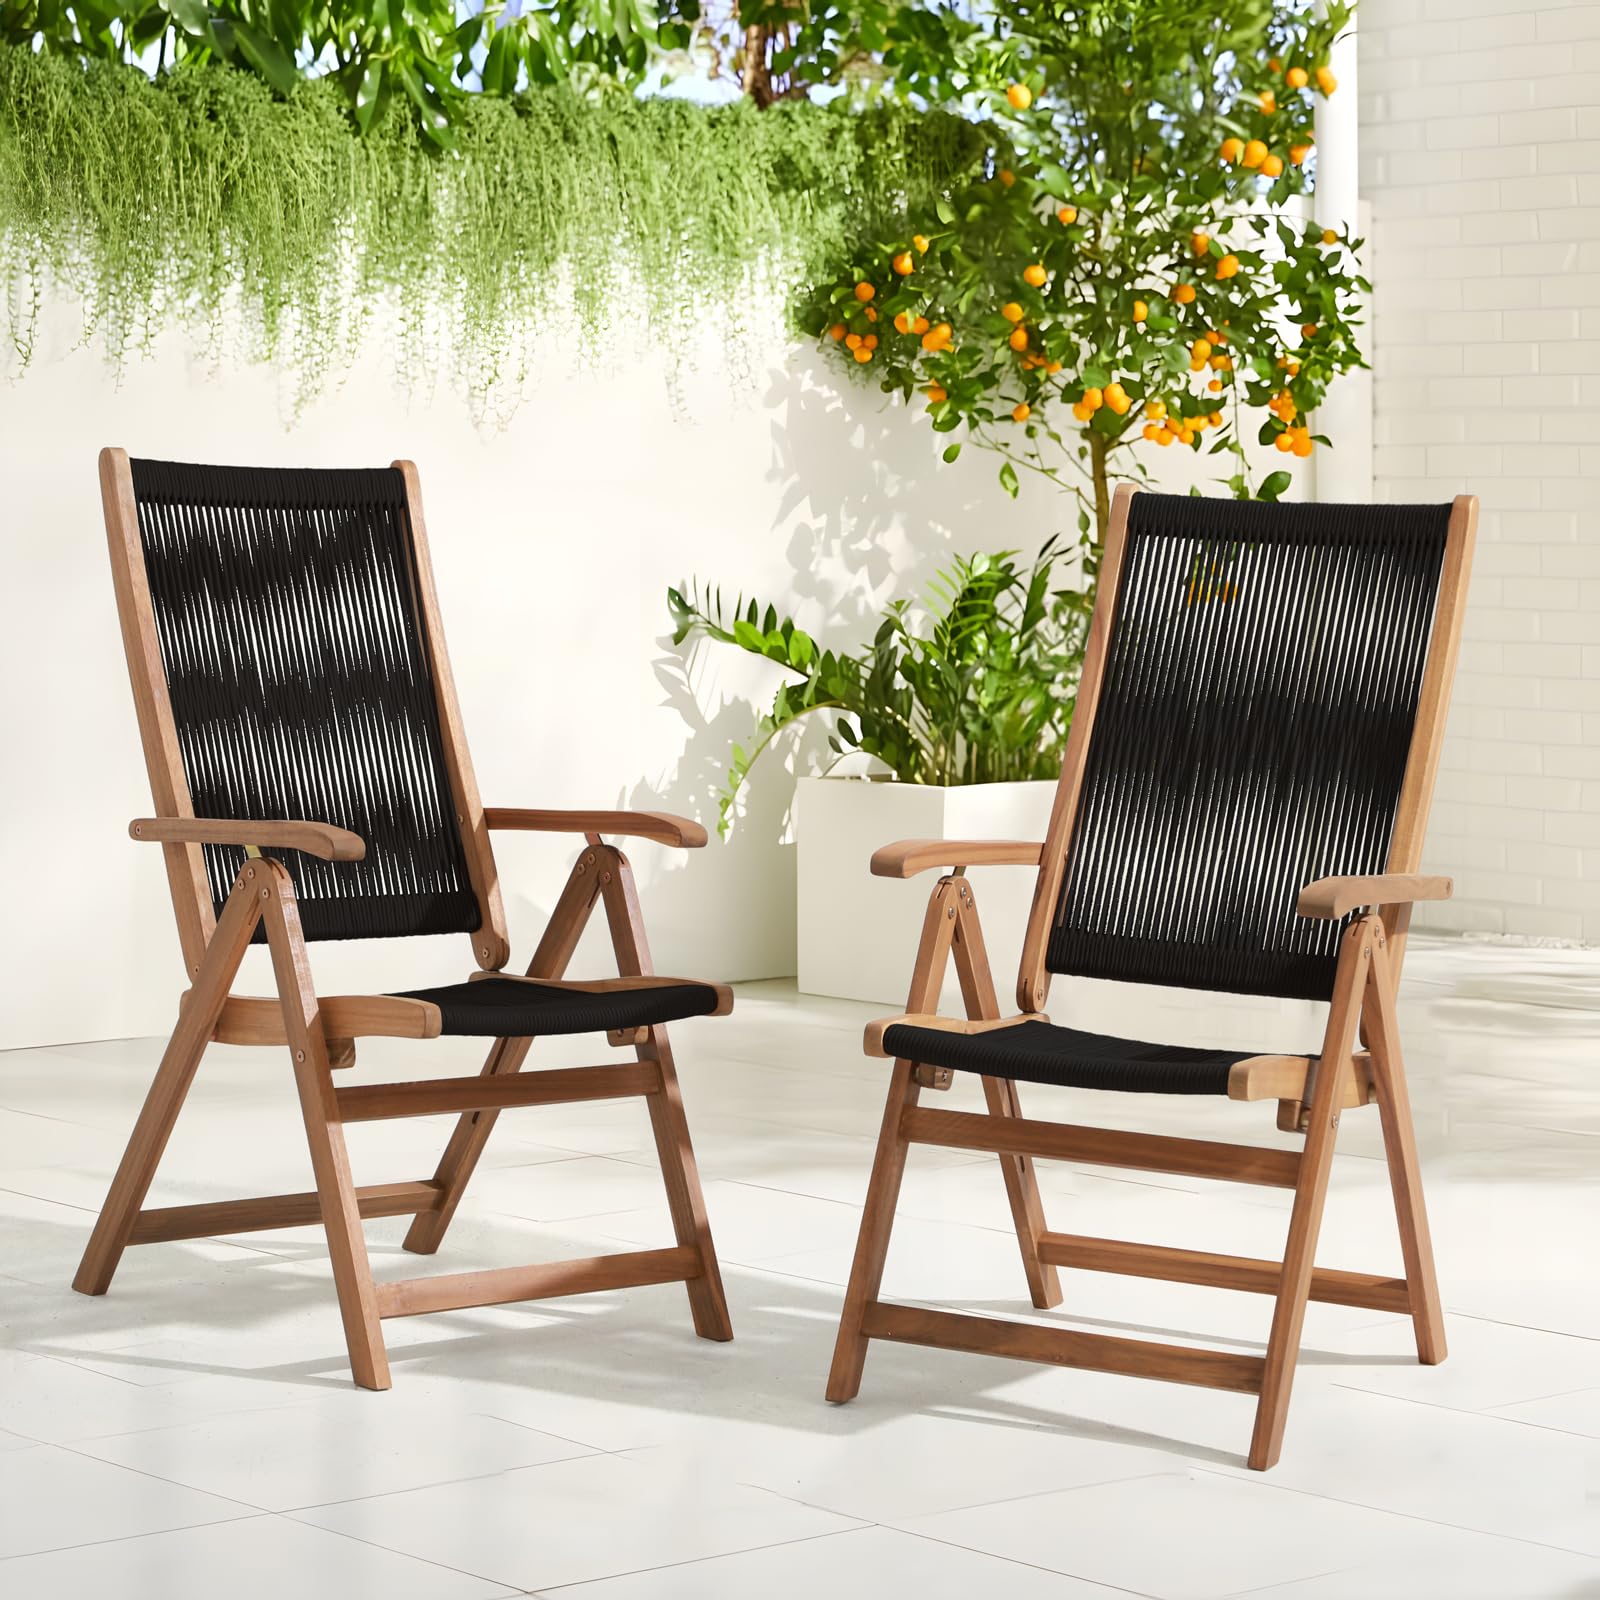 2pcs Folding Patio Dining Chairs, Outdoor Acacia Wooden Rope Reclining Chair w/Armrest, FSC Certified Wood,